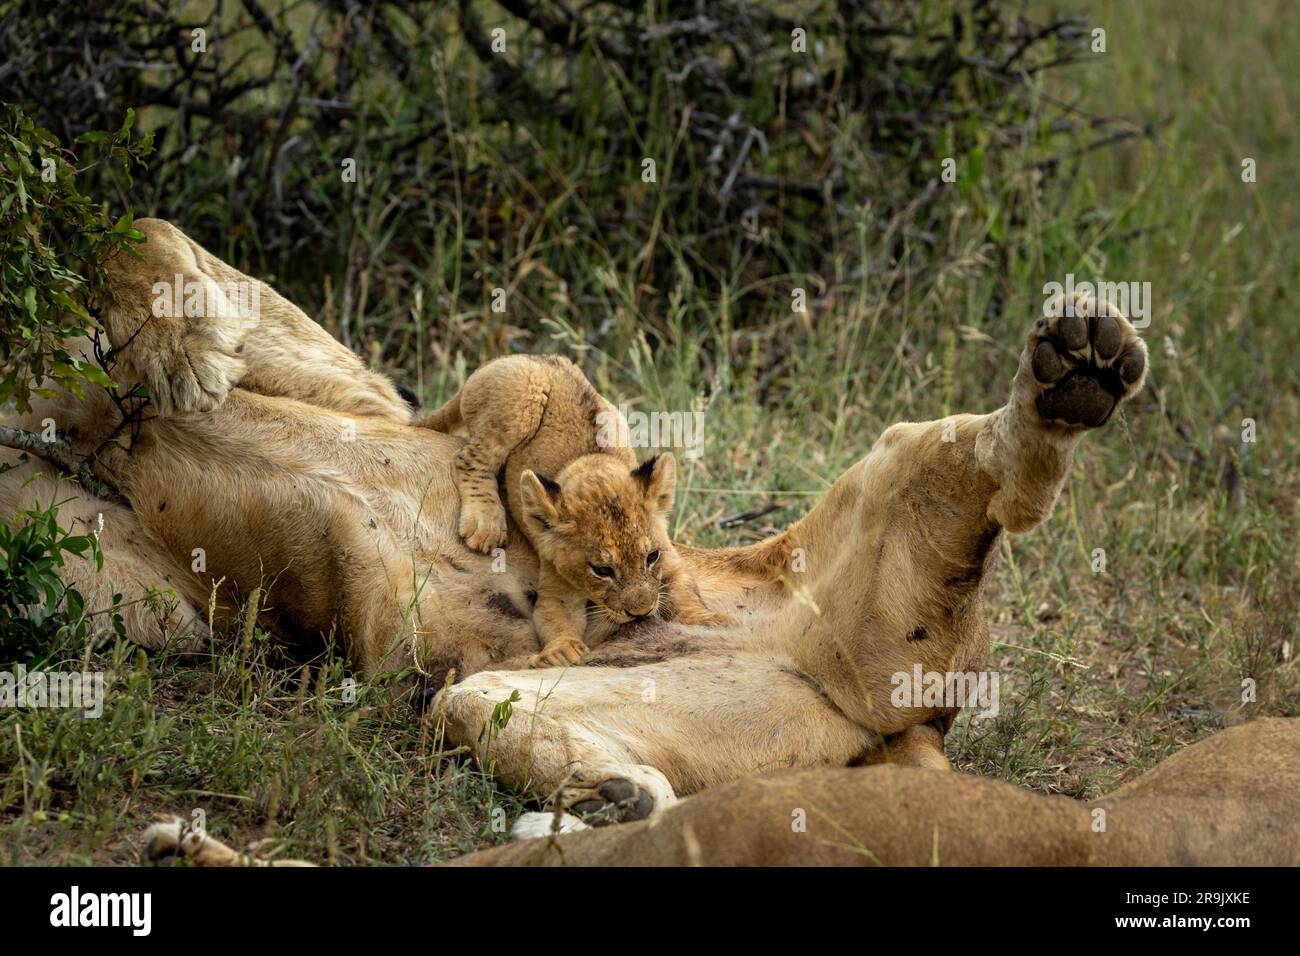 A lion cub, Panthera leo, suckling from its mother. Stock Photo